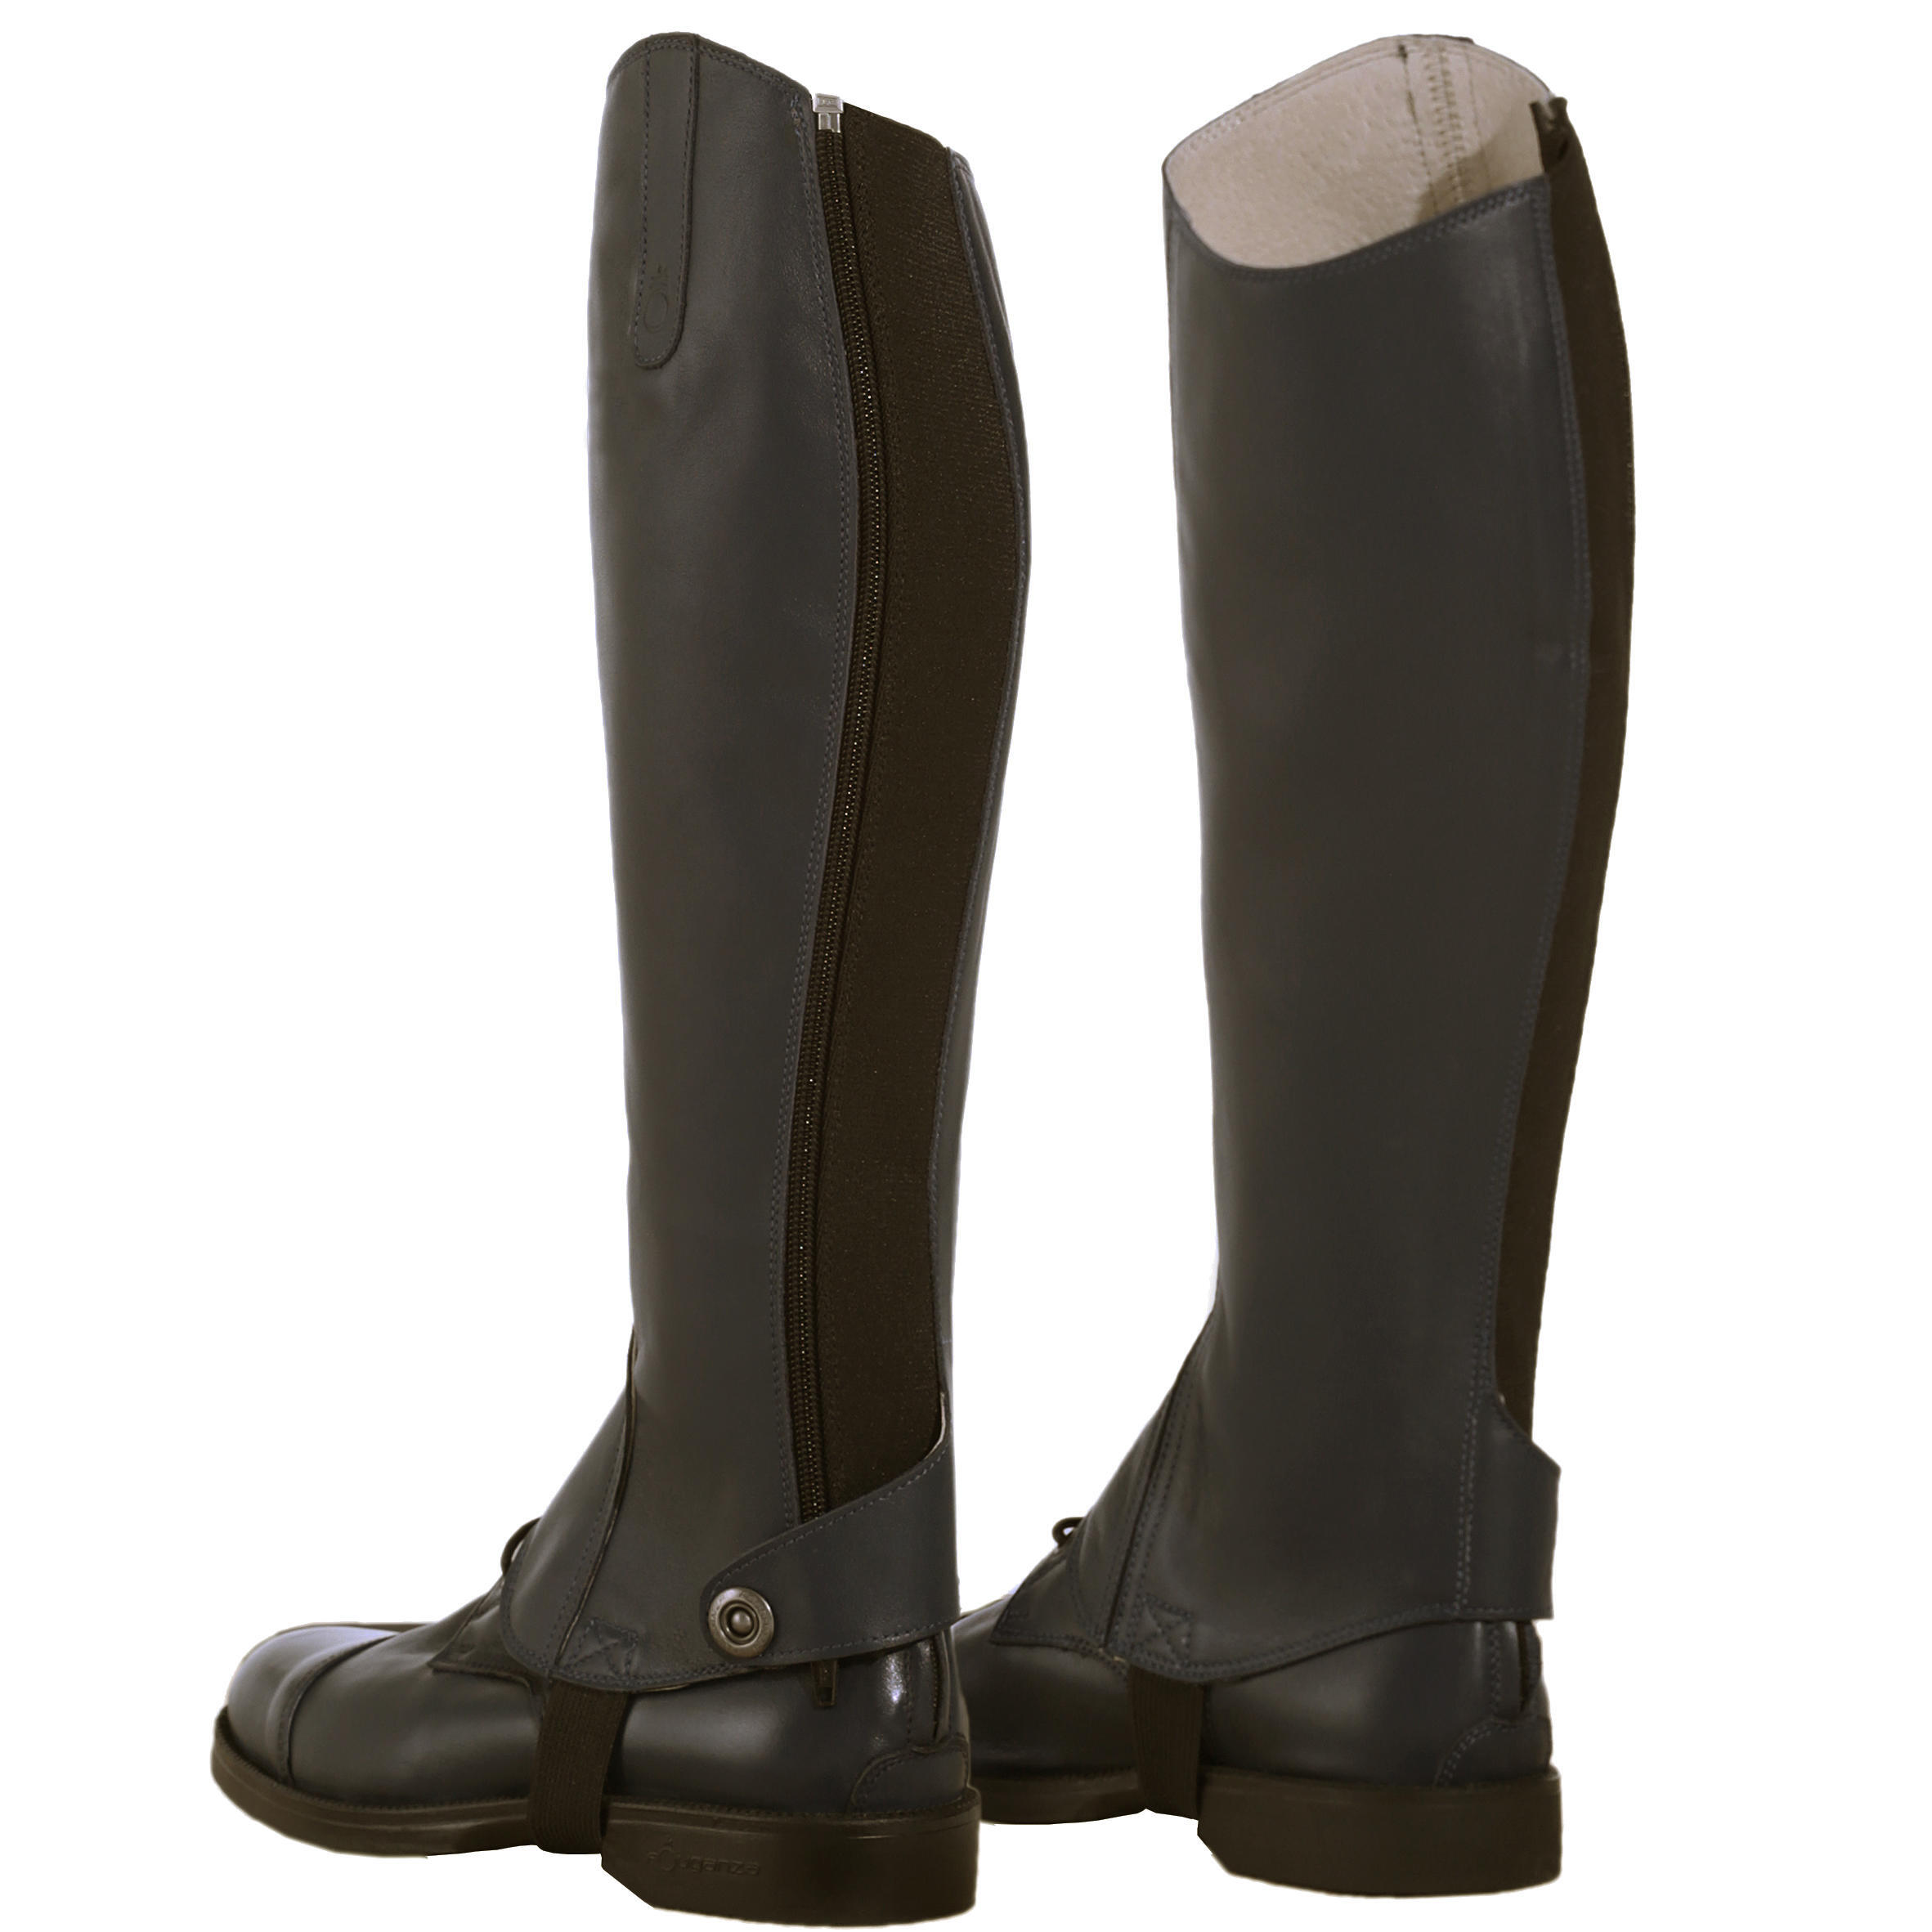 Paddock 700 Adult Horse Riding Leather Half Chaps - Brown 4/10